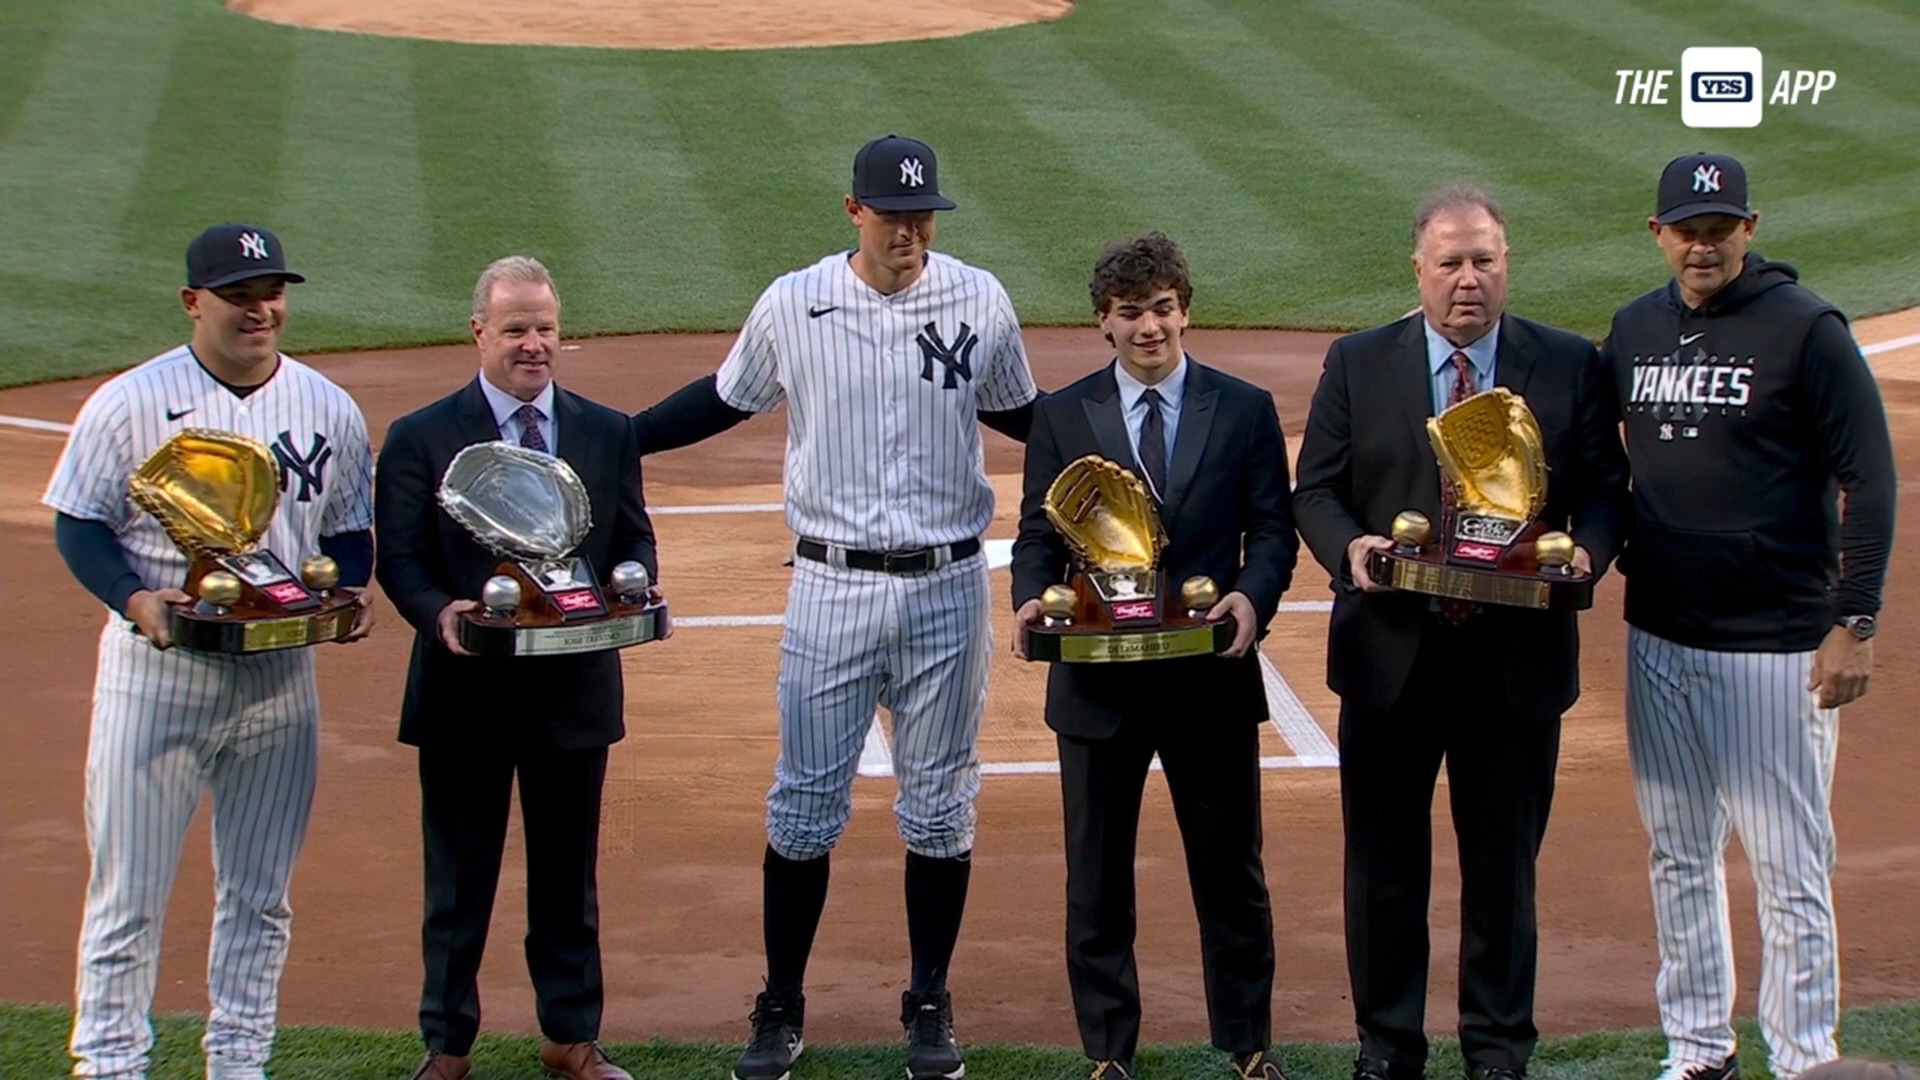 YES Network on X: Just a couple of award winners. Jose Trevino received  his Gold Glove Award and Platinum Glove Award for the 2022 season, while DJ  LeMahieu took home his Gold